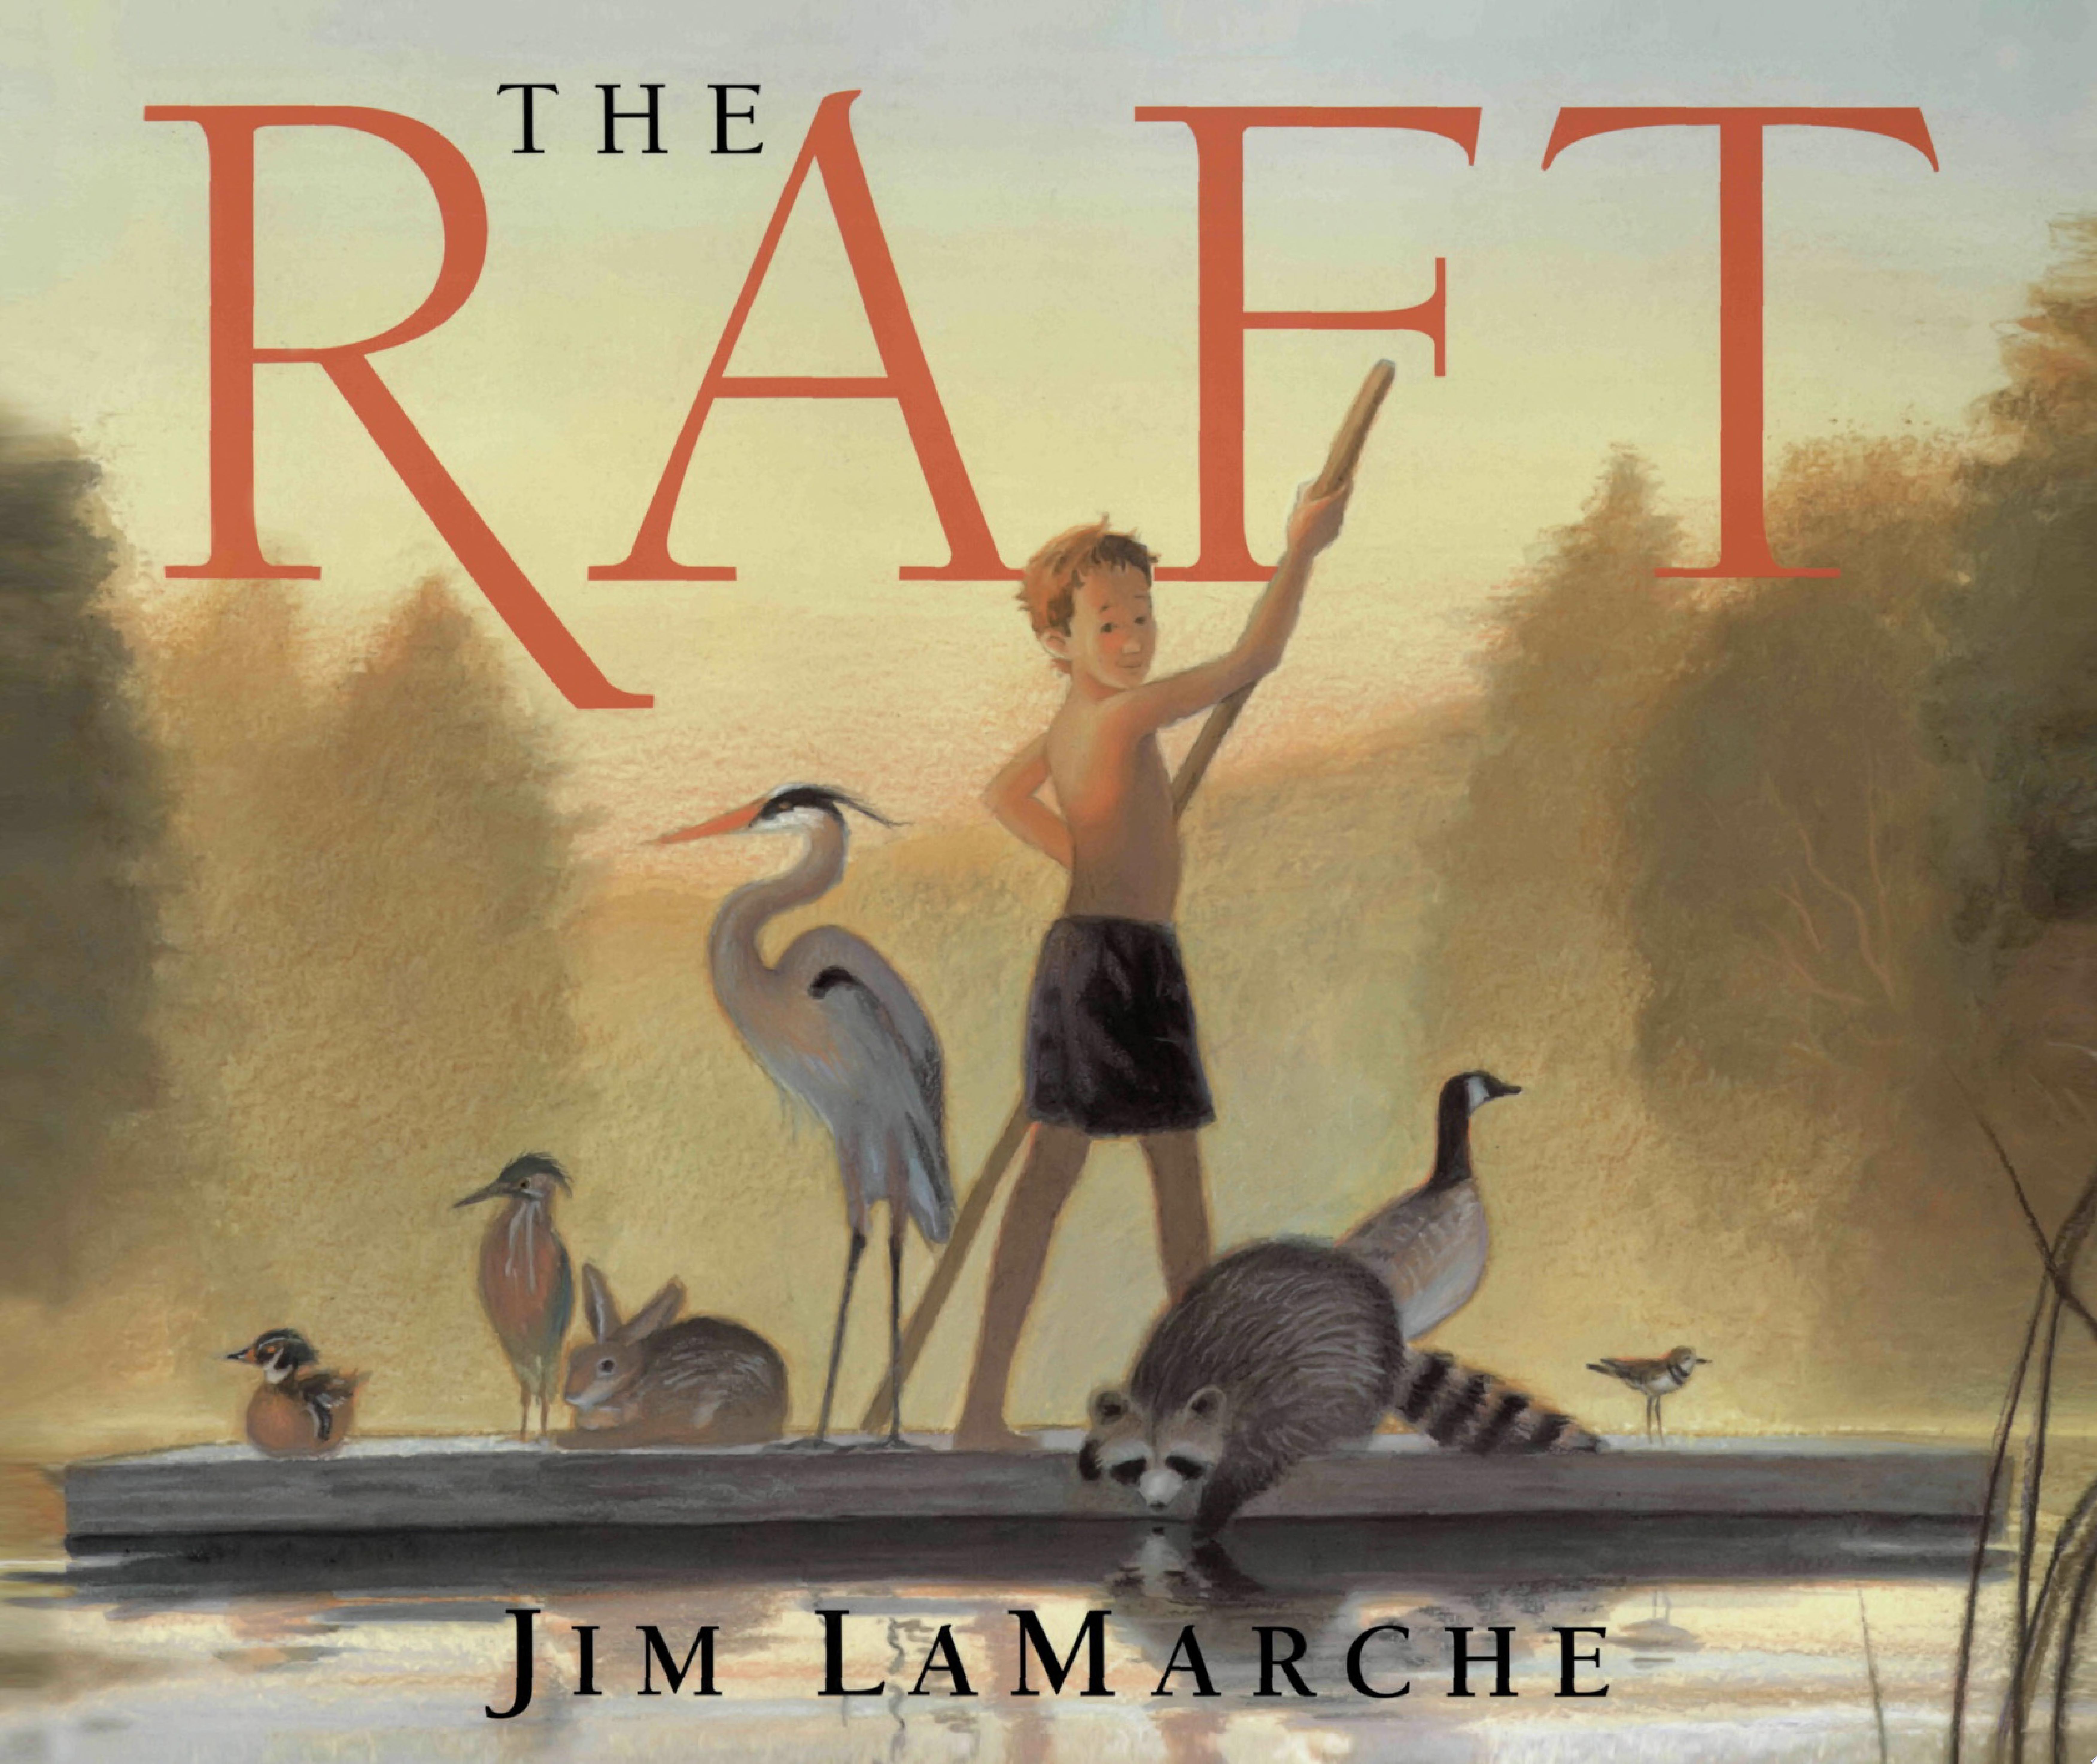 Image for "The Raft"